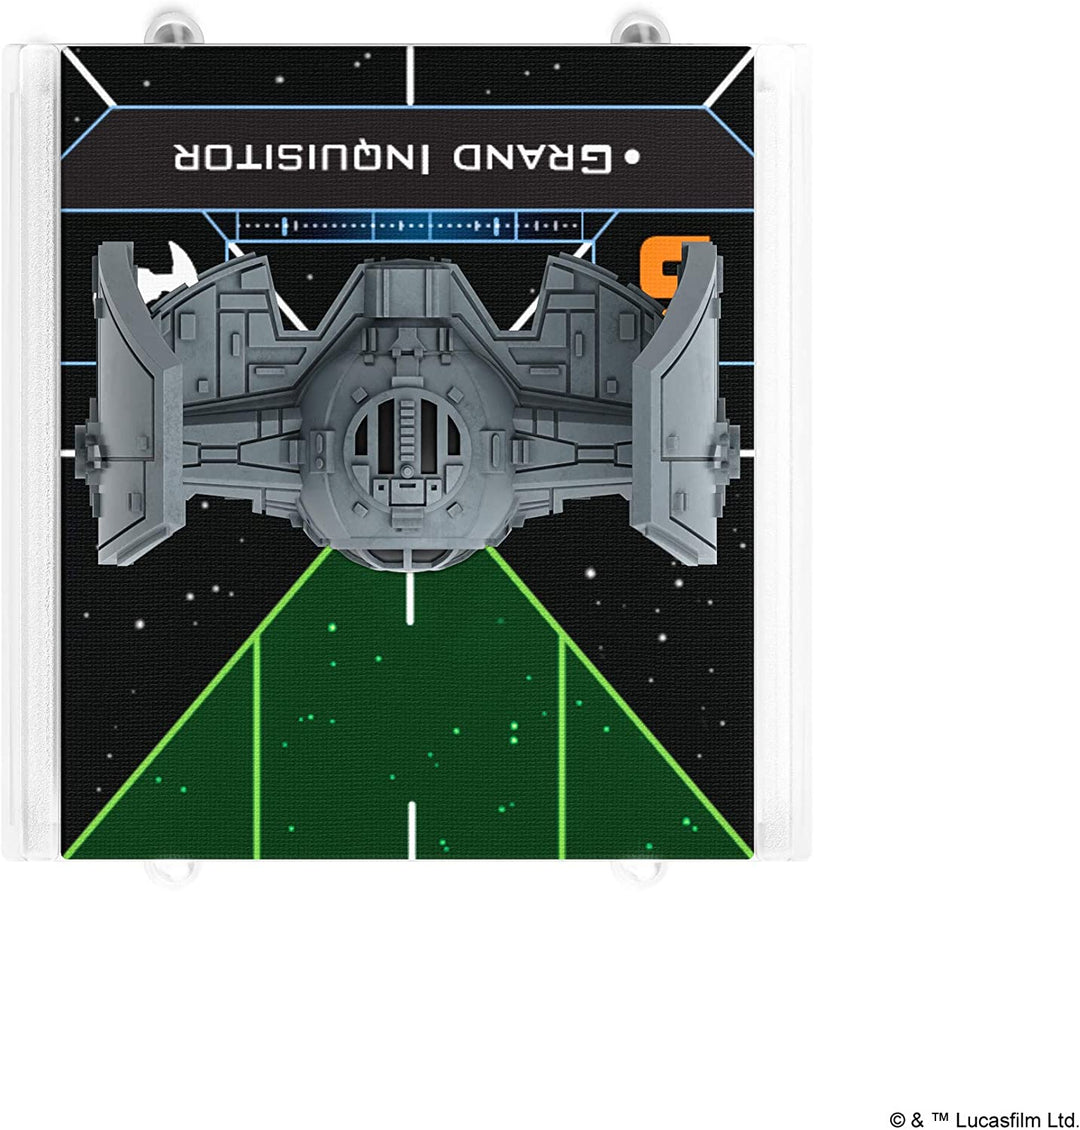 Star Wars: X-Wing - Inquisitors Tie Expansion Pack